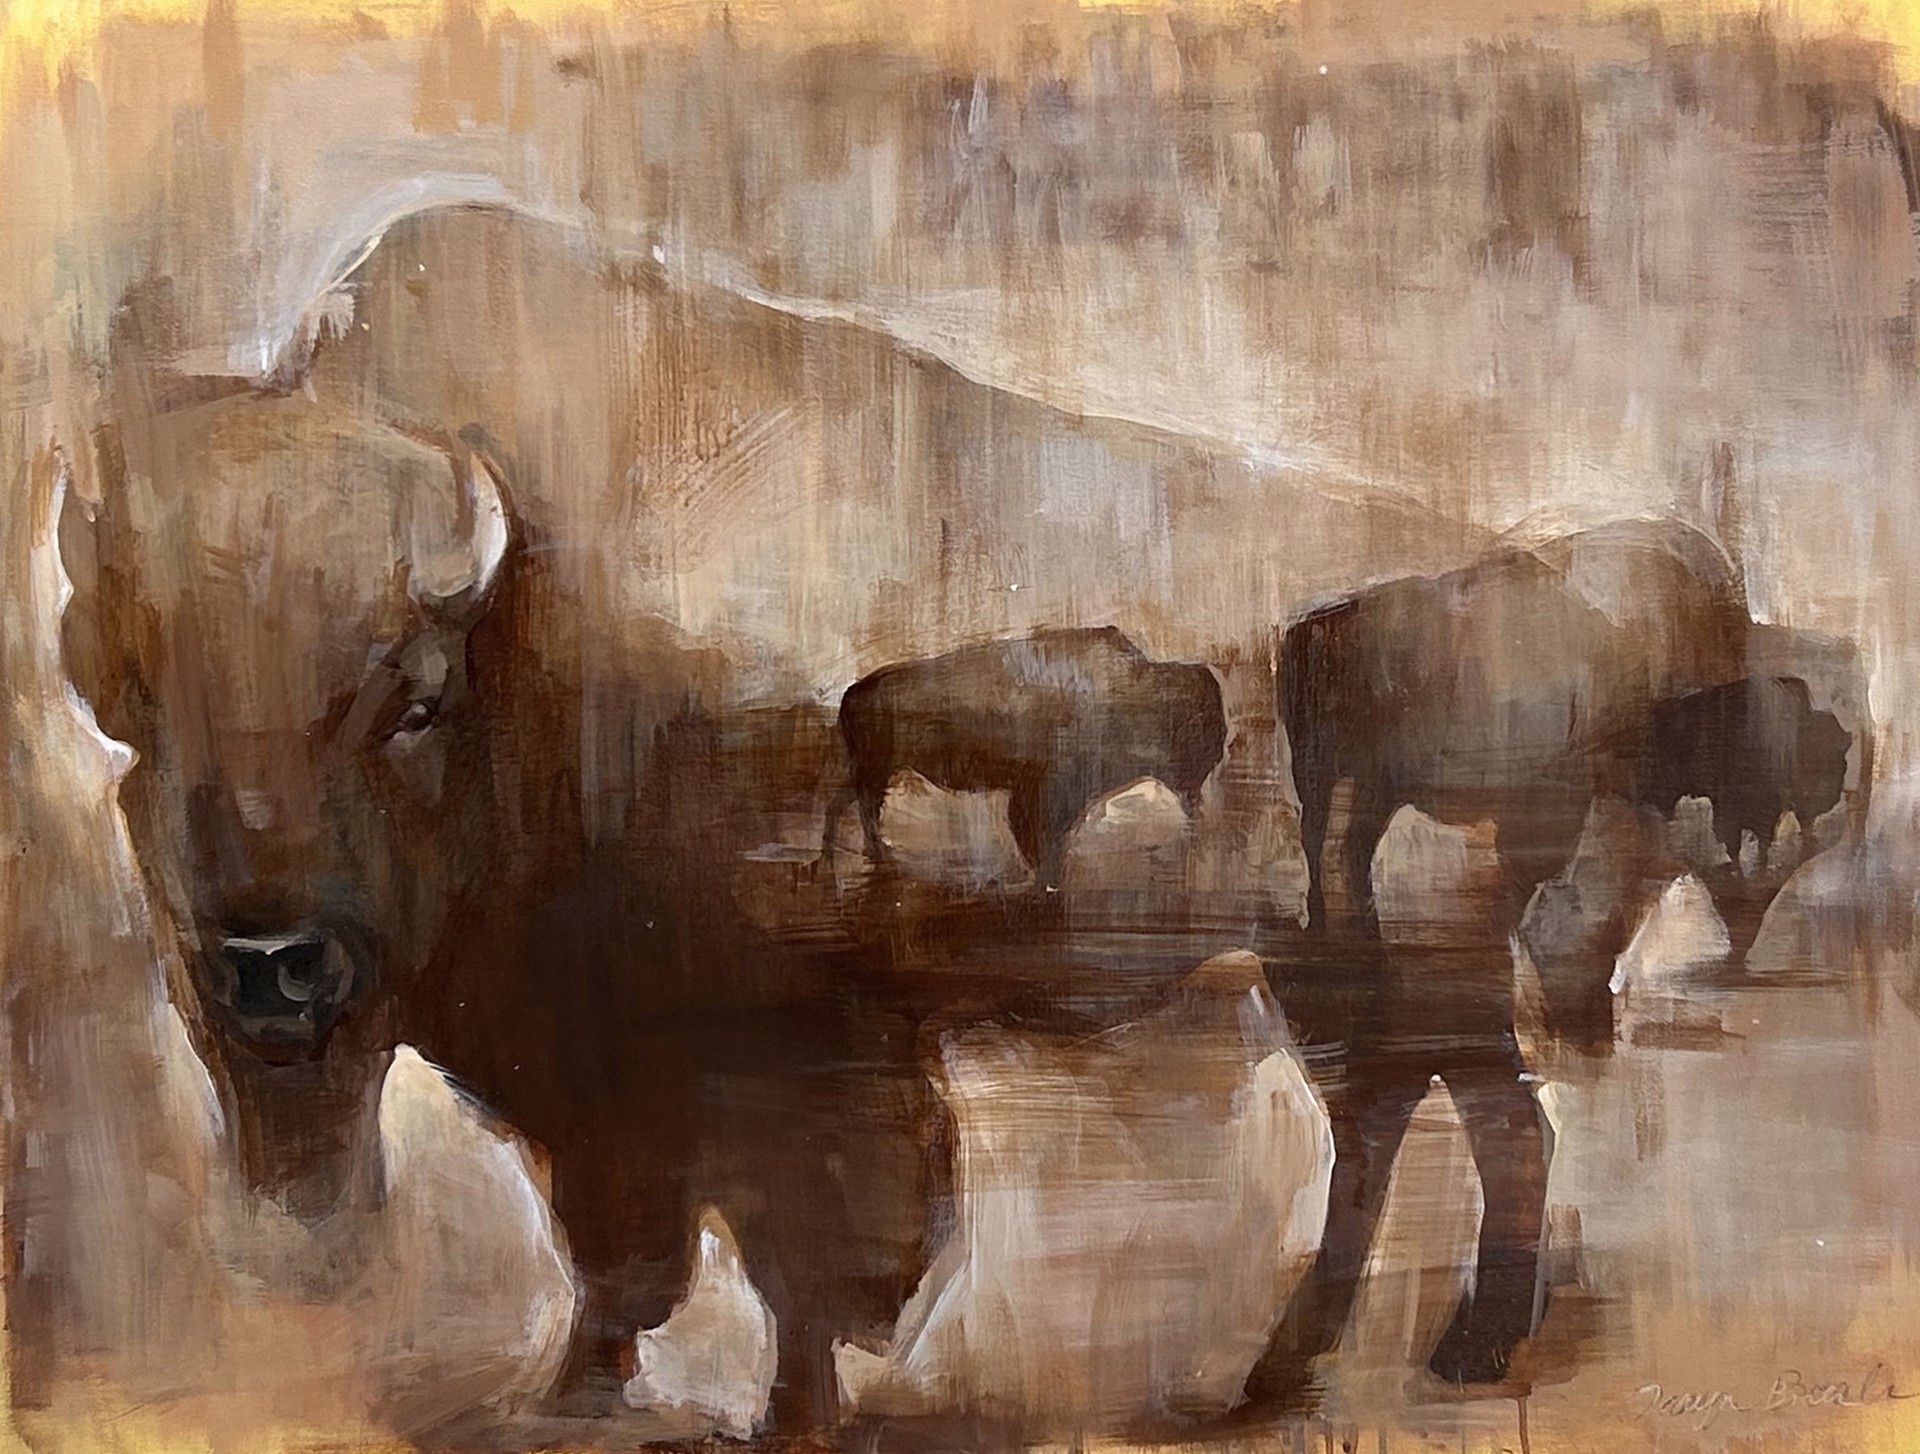 Original Acrylic Painting By Taryn Boals Featuring Transparent Overlays Of Bison Silhouettes In A Warm Neutral Color Palette 